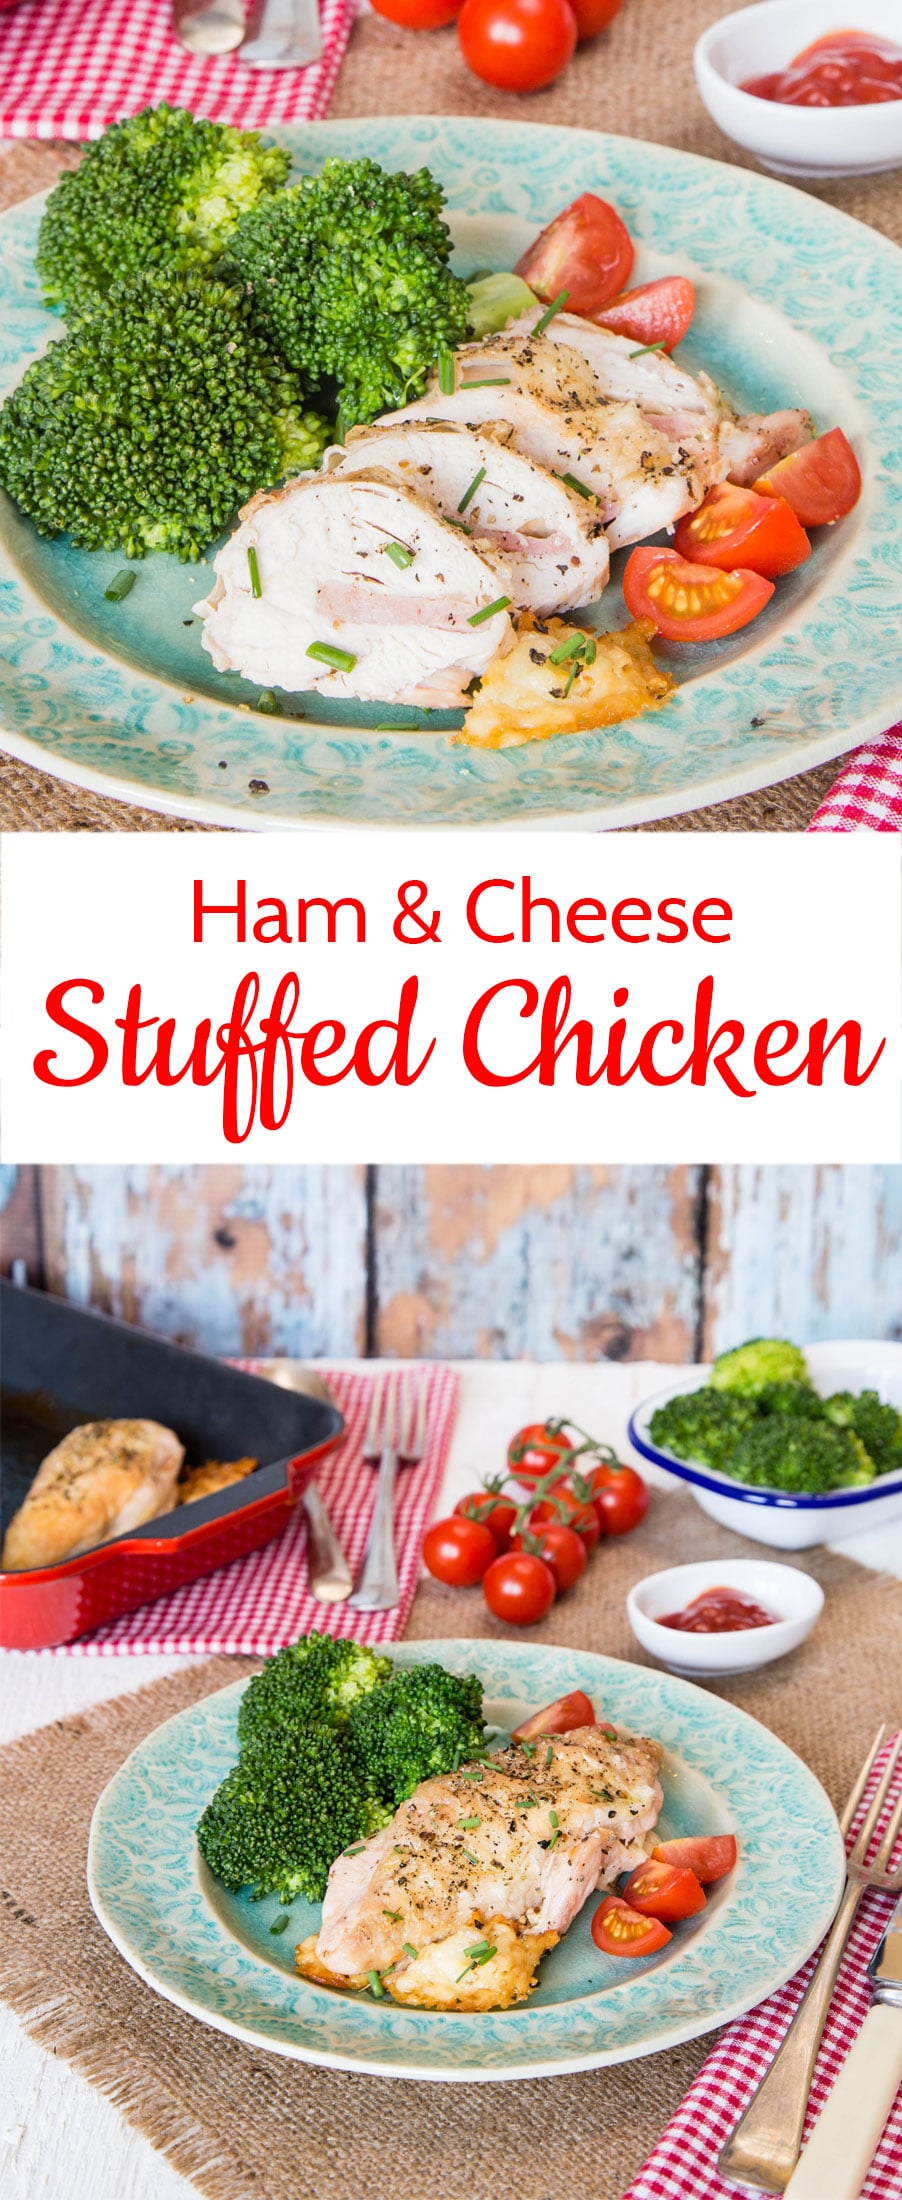 These ham and cheese stuffed chicken breasts are delicious, quick and easy to make and a real treat when you want a tasty meal that's a bit special but with minimum fuss.